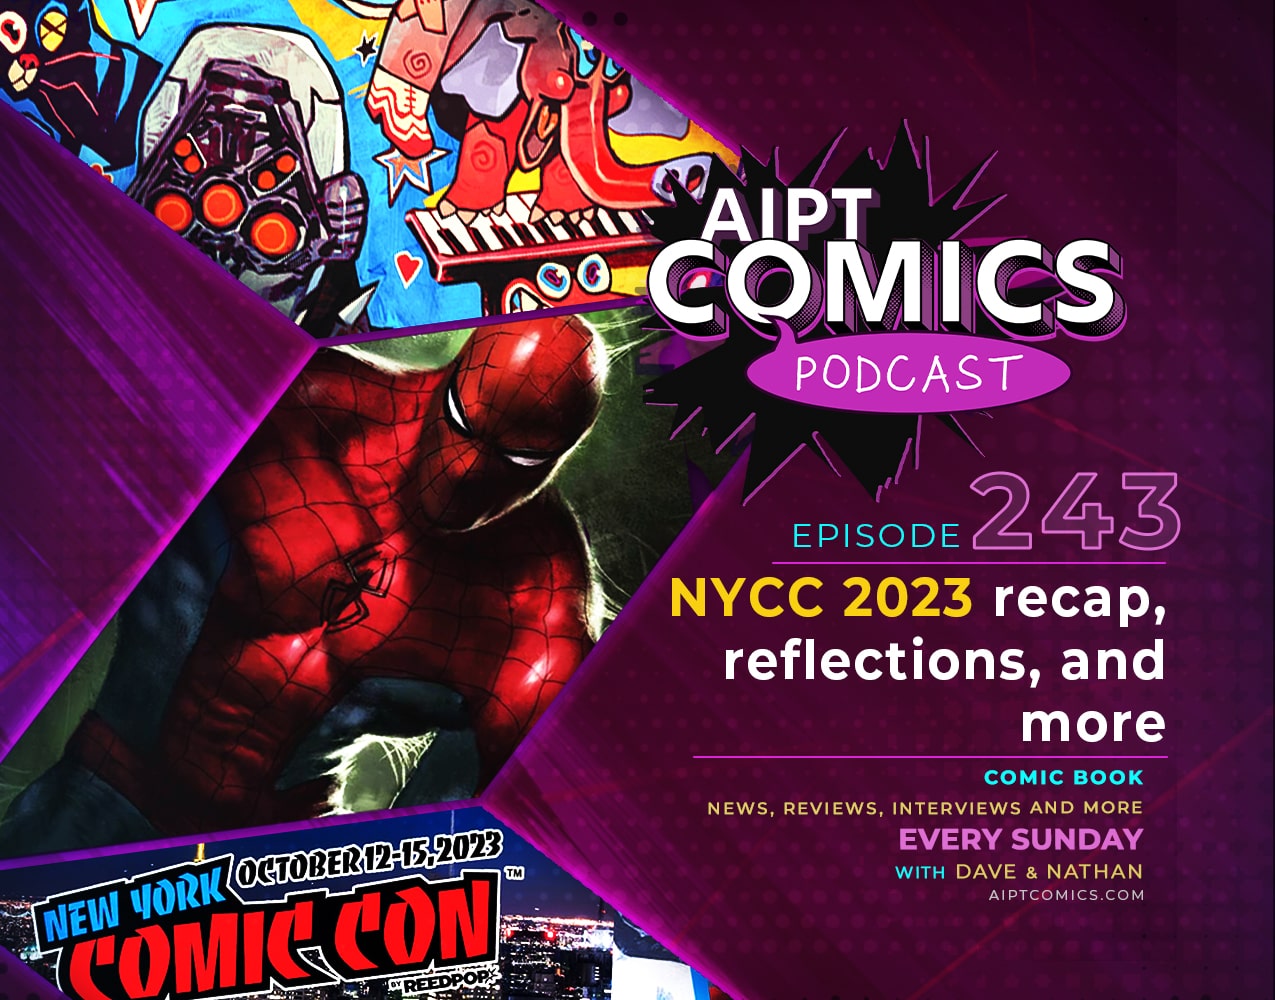 AIPT Comics Podcast Episode 243: NYCC 2023 recap, reflections, and more